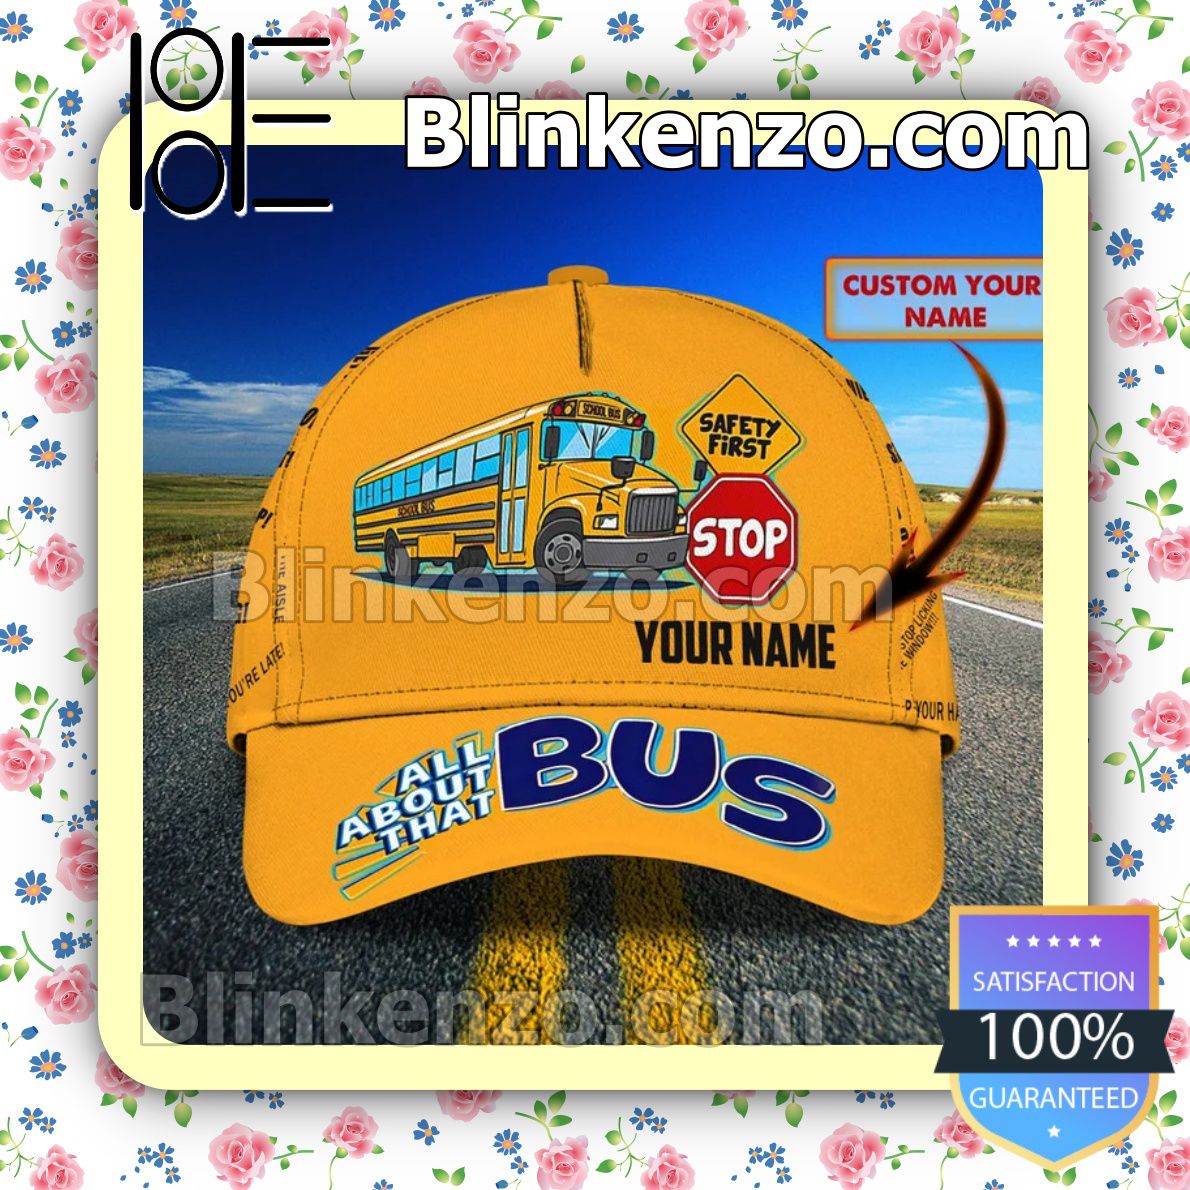 Sale Off Personalized School Bus All About That Bus Baseball Caps Gift For Boyfriend